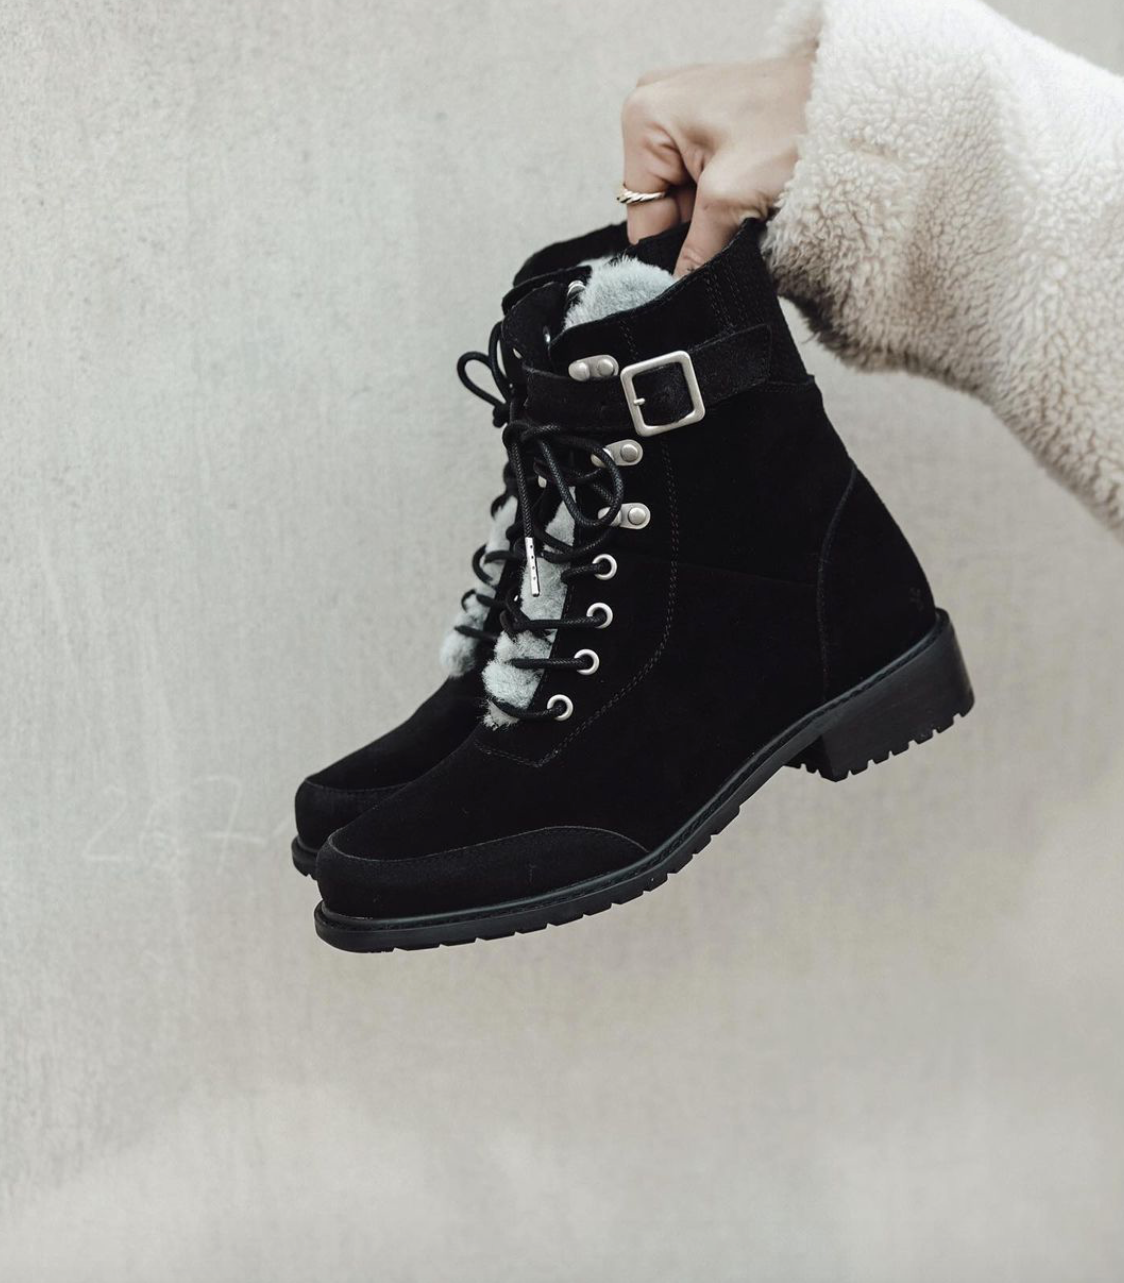 Black Waldron buckled lace-up boots. Featuring a hard wearing sole and a sheepskin inner.